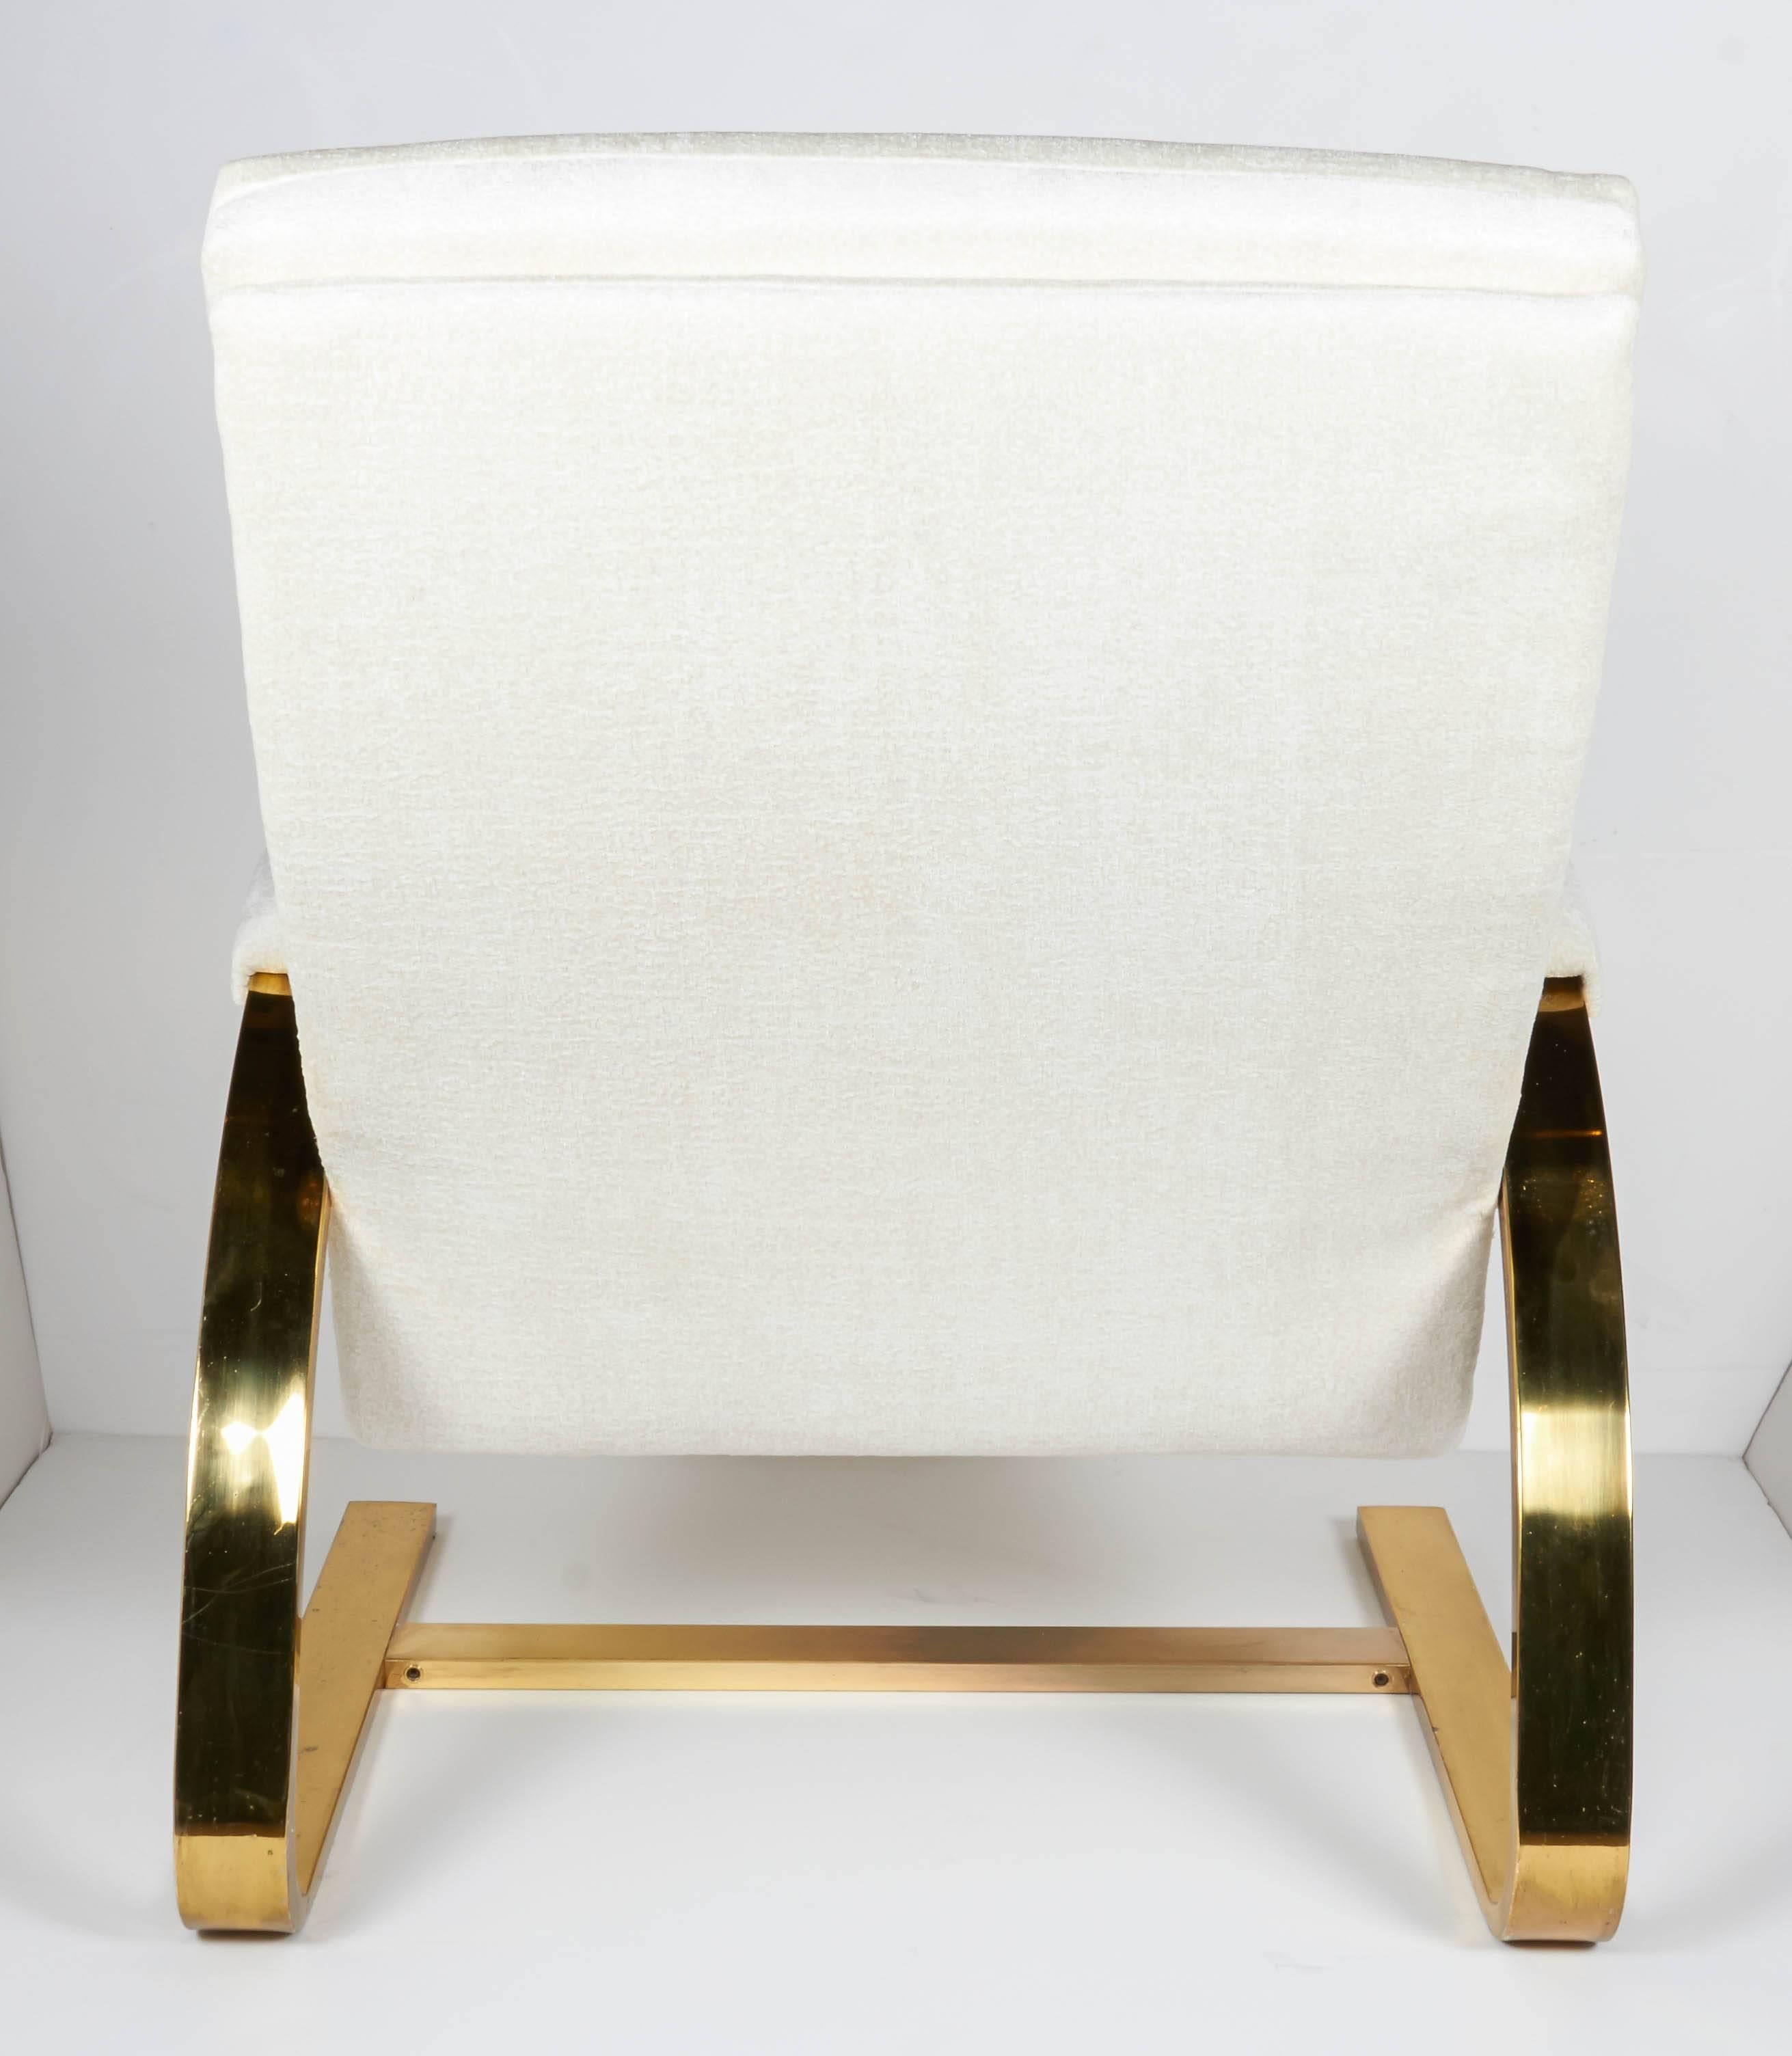 20th Century Pair of Rare Milo Baughman Lounge Chairs with Brass Cantilevered Frames